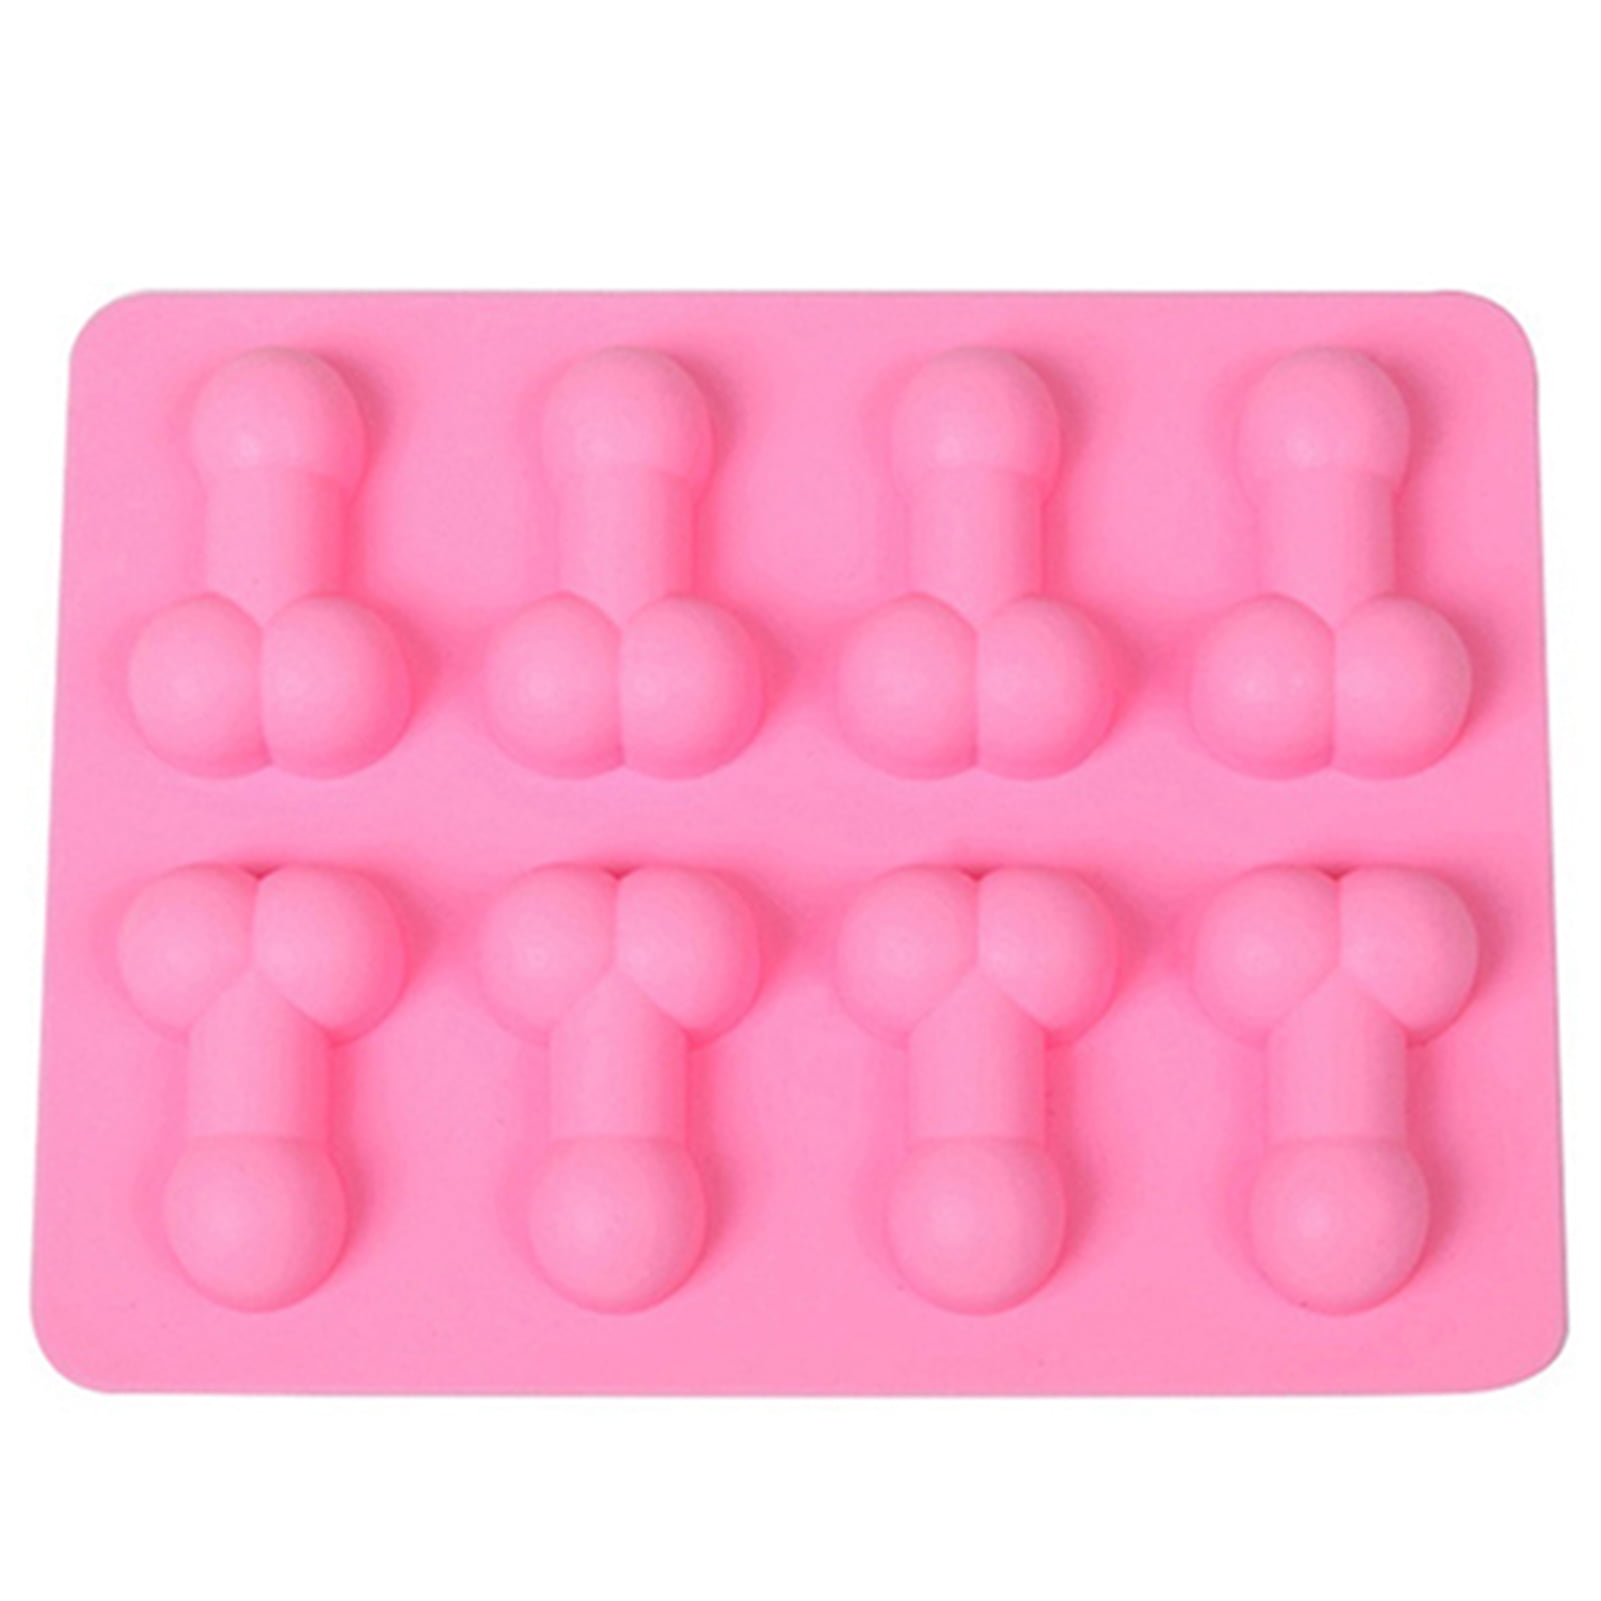 12-Cavity non-sticky Cake Mold Silicone Penis Mould Candy Jelly Chocolate Baking 